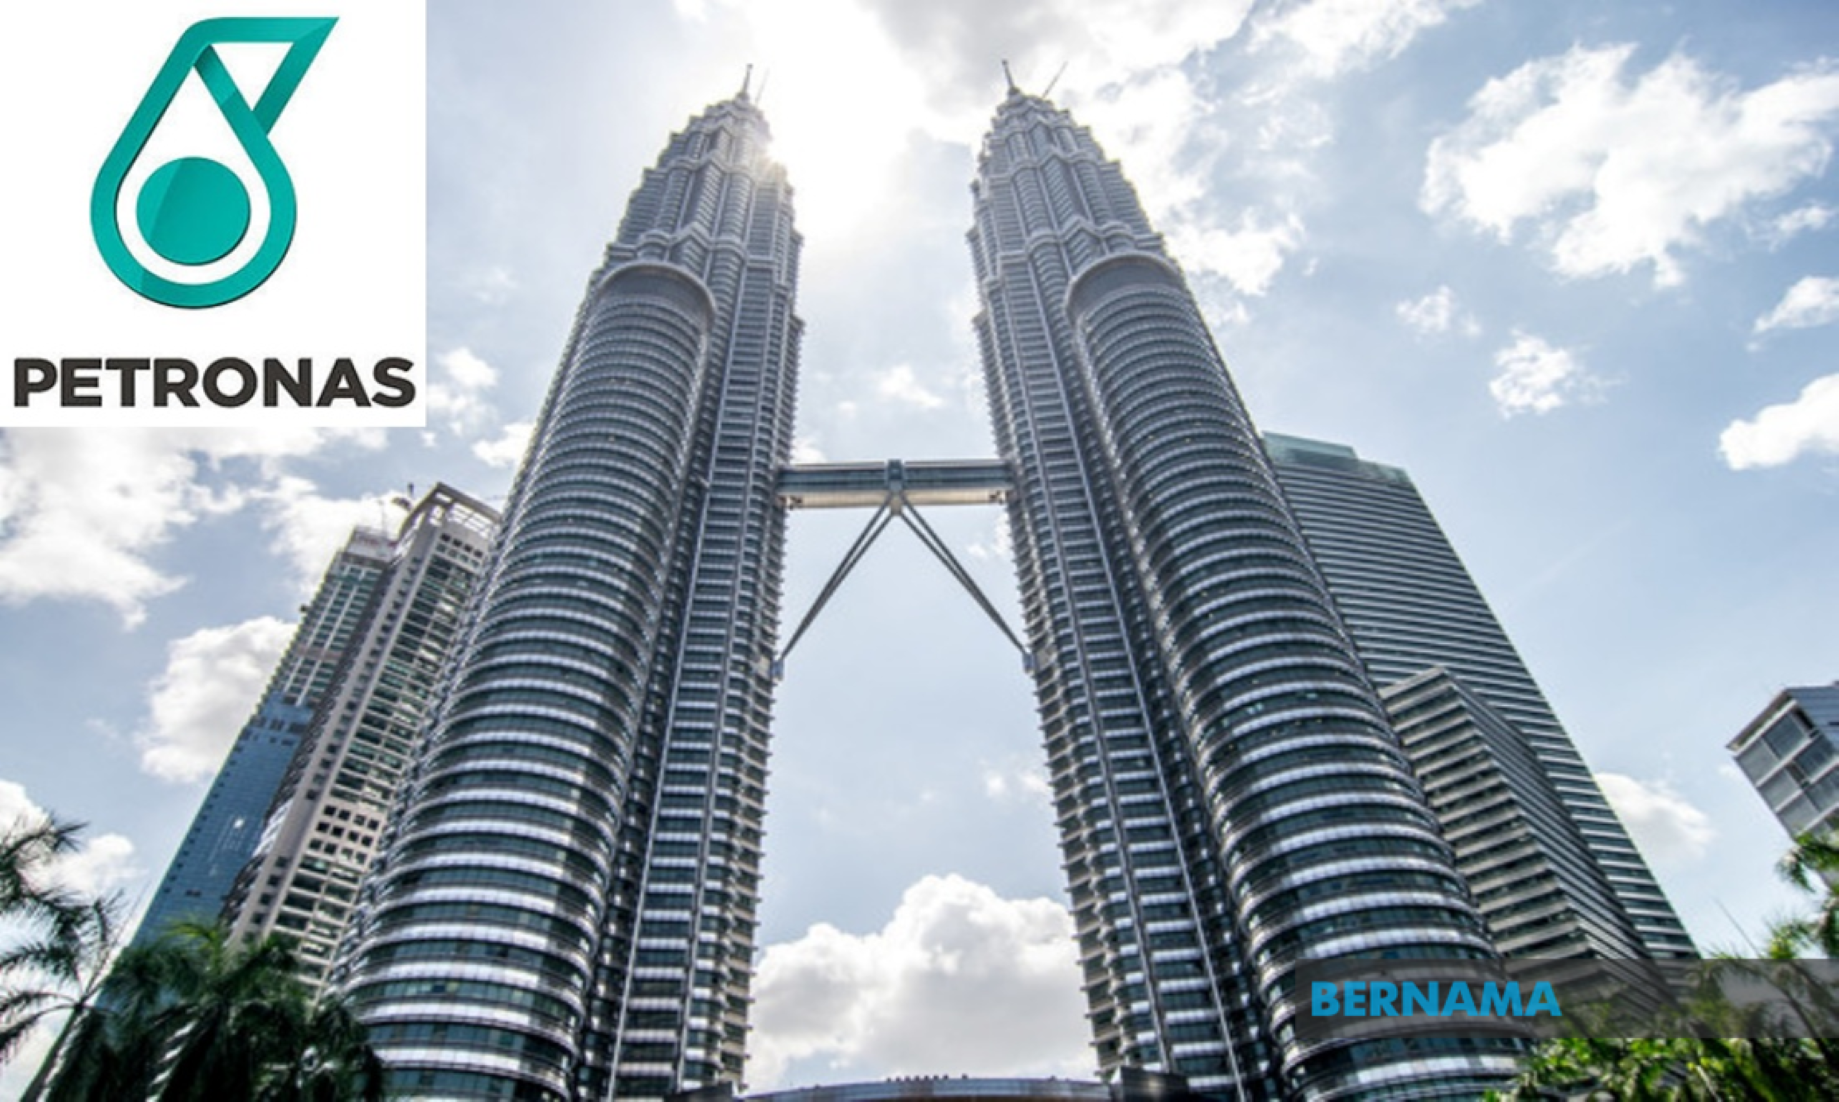 Petronas Malaysia FY22 profit surged to record high on higher oil prices